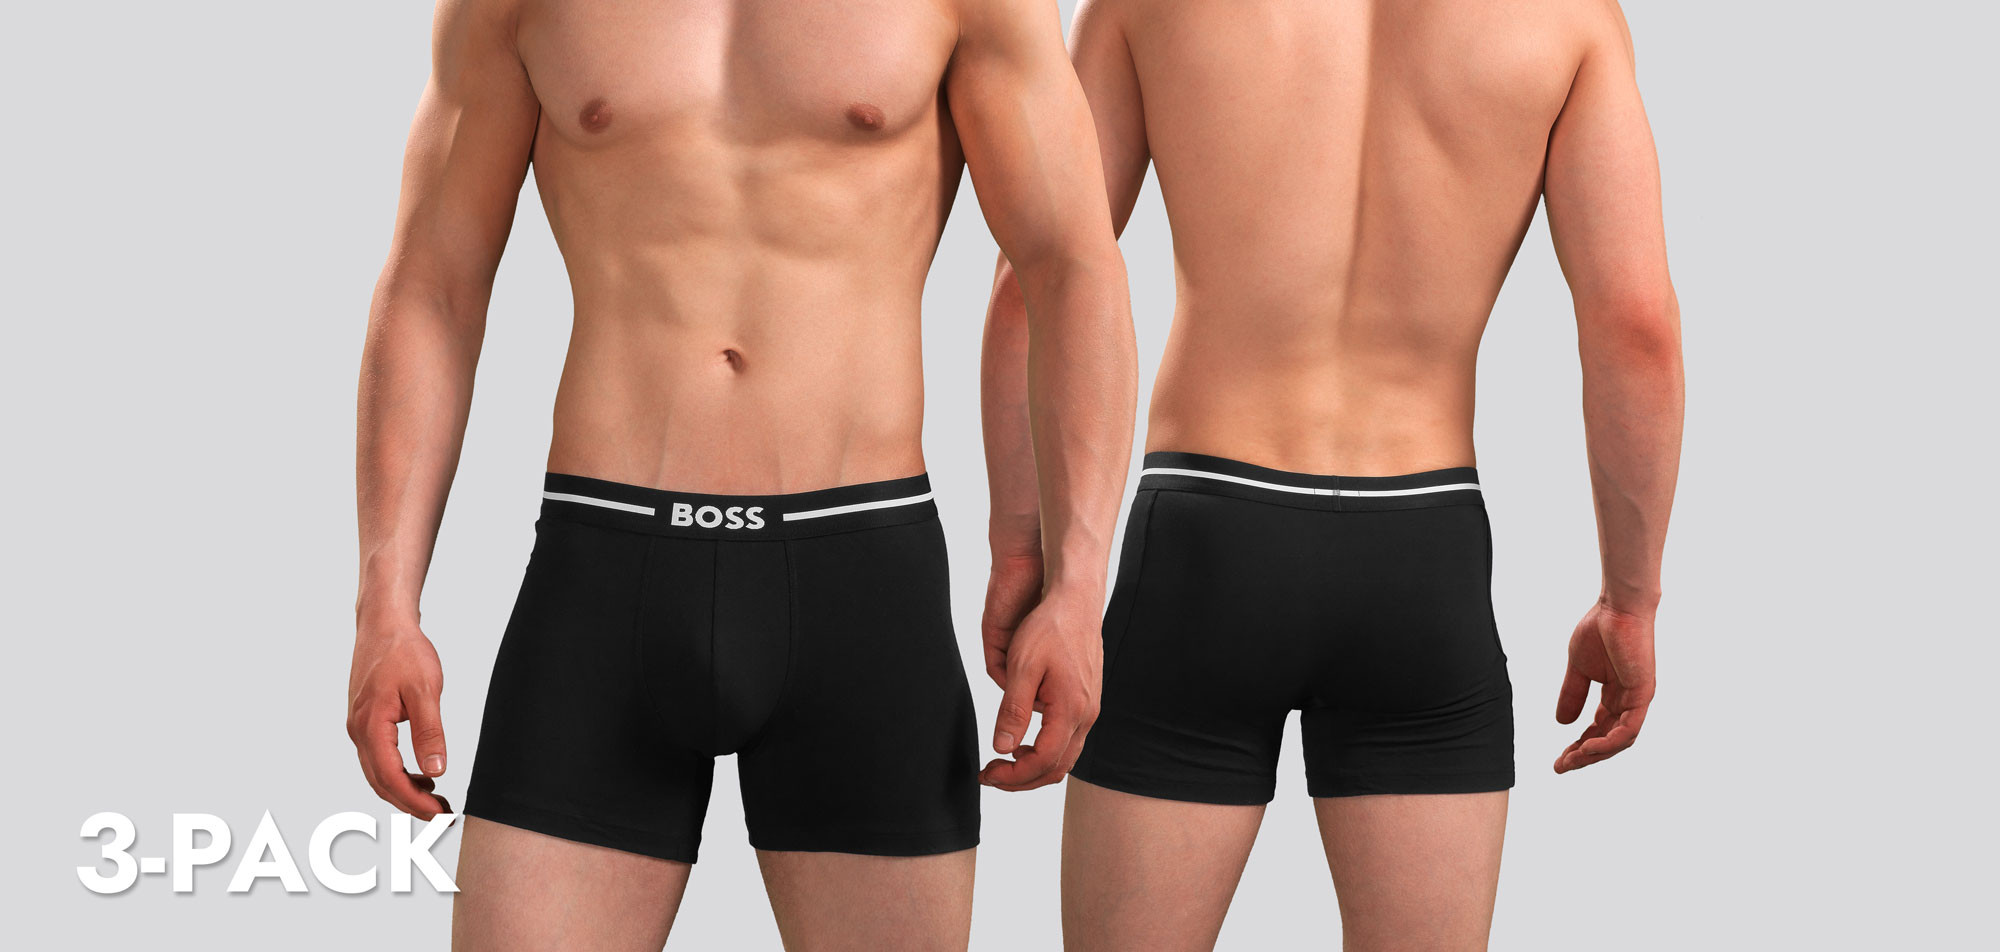 Boss Boxer Brief 3-Pack 926 Bold,